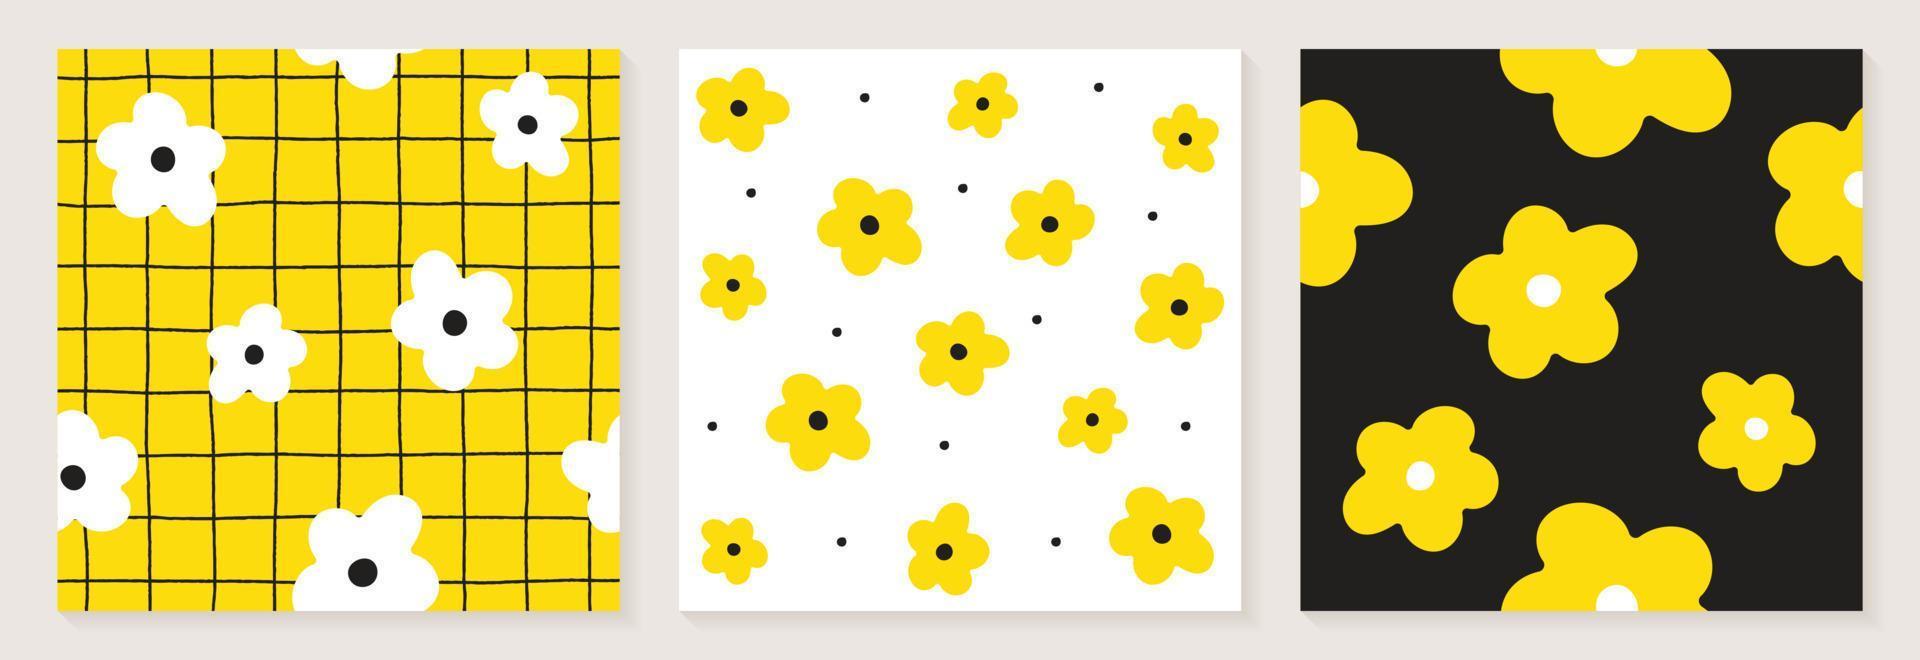 Cute Daisy Flower White Black Yellow Color Confetti Flat Style Fabric Textile Grid Line Check Seamless Pattern Background Botanic Meadow Summer Spring Card Set Collection Bundle Vector Illustration